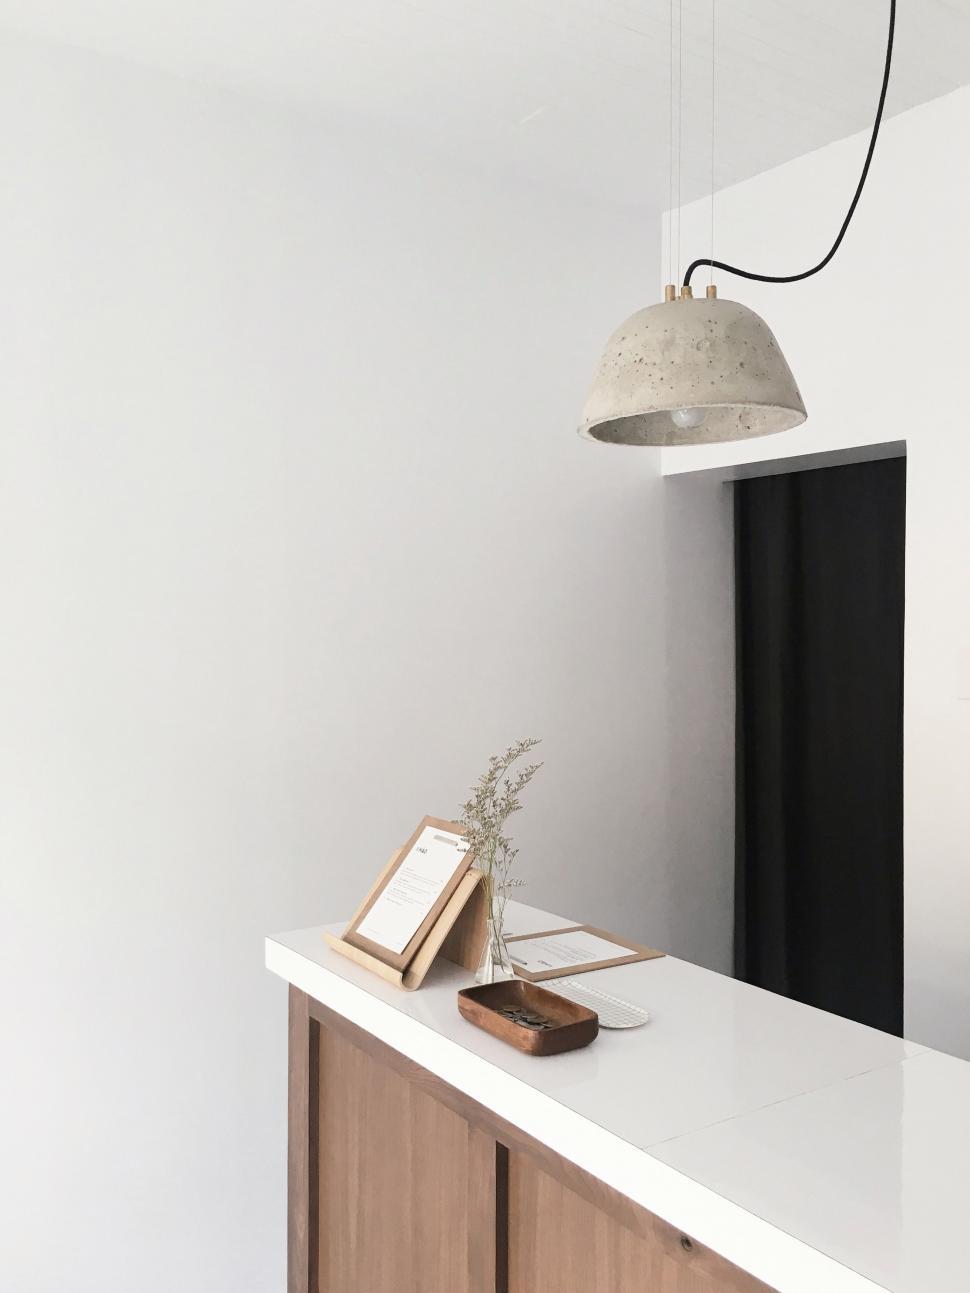 Free Image of White Room With Wooden Cabinet and Lamp 